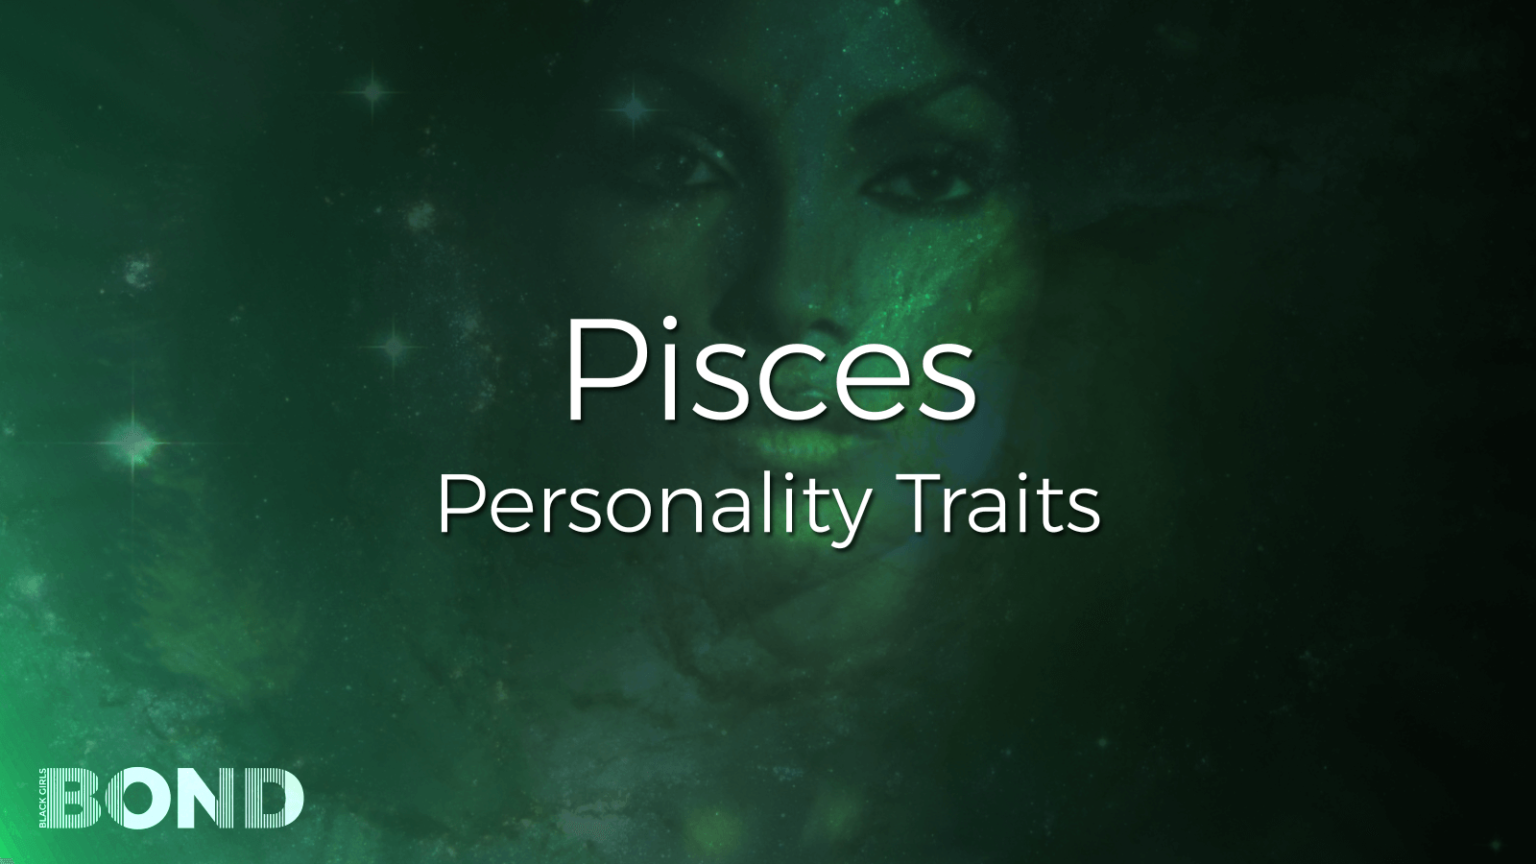 Pisces Personality Traits